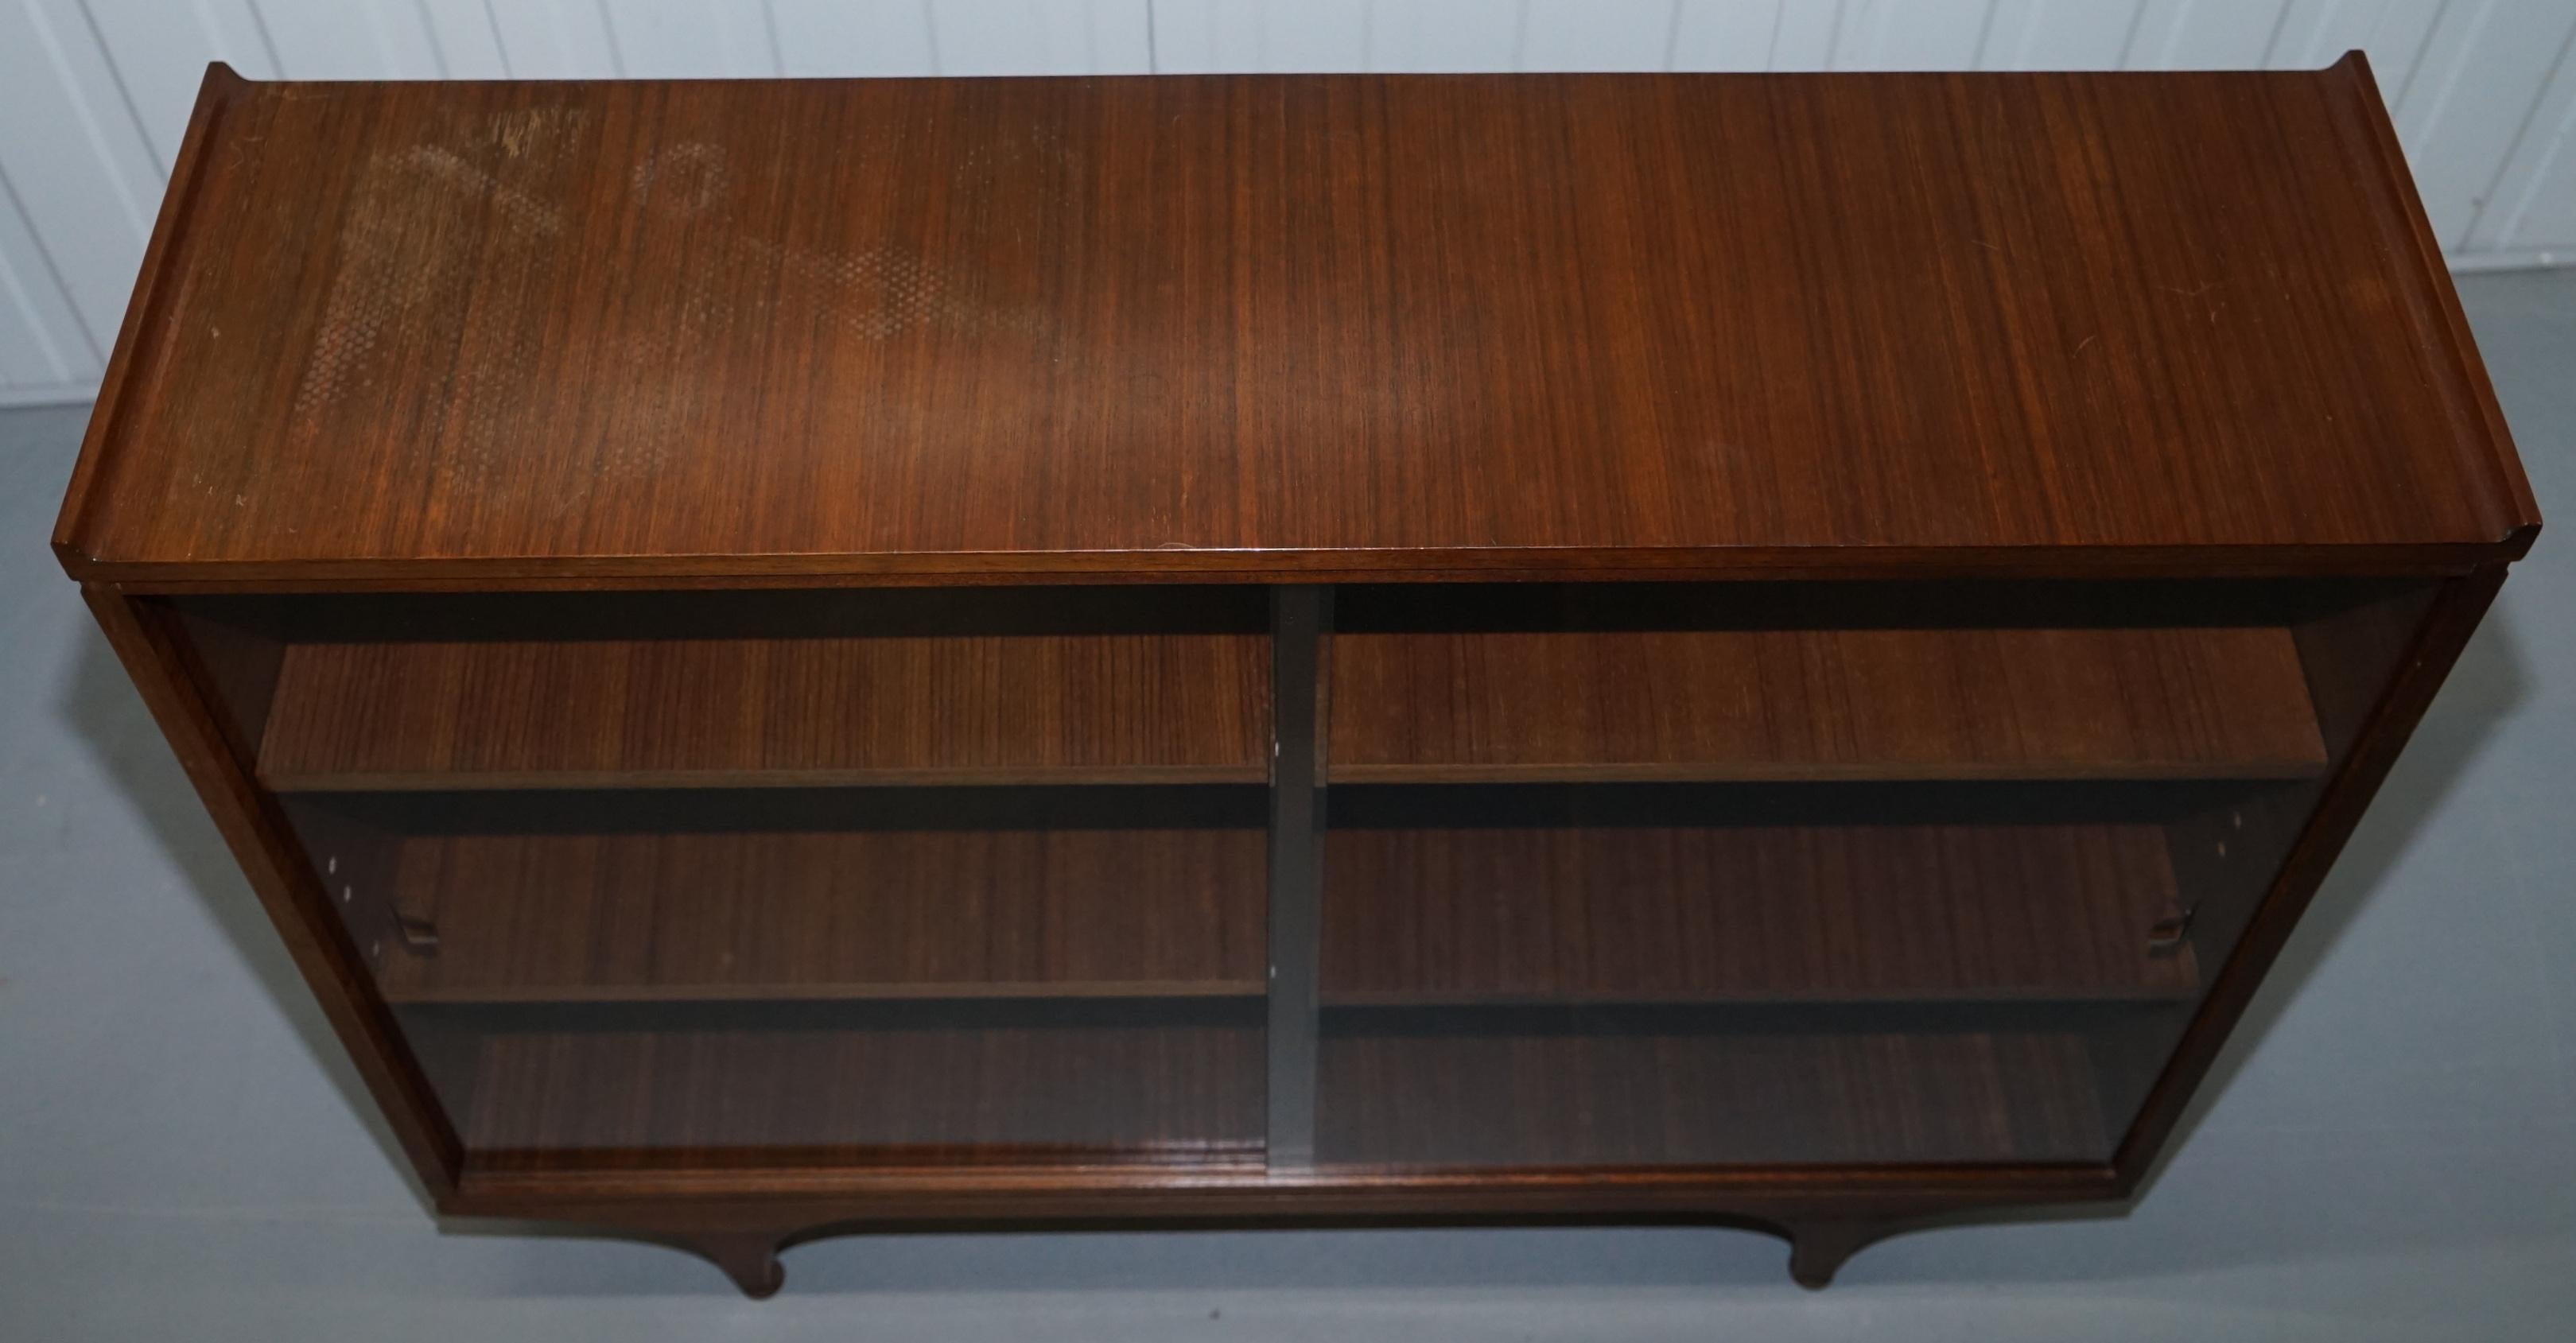 Pair of Sculpted Mid-Century Modern Teak Bookcases with Glass Sliding Doors 11